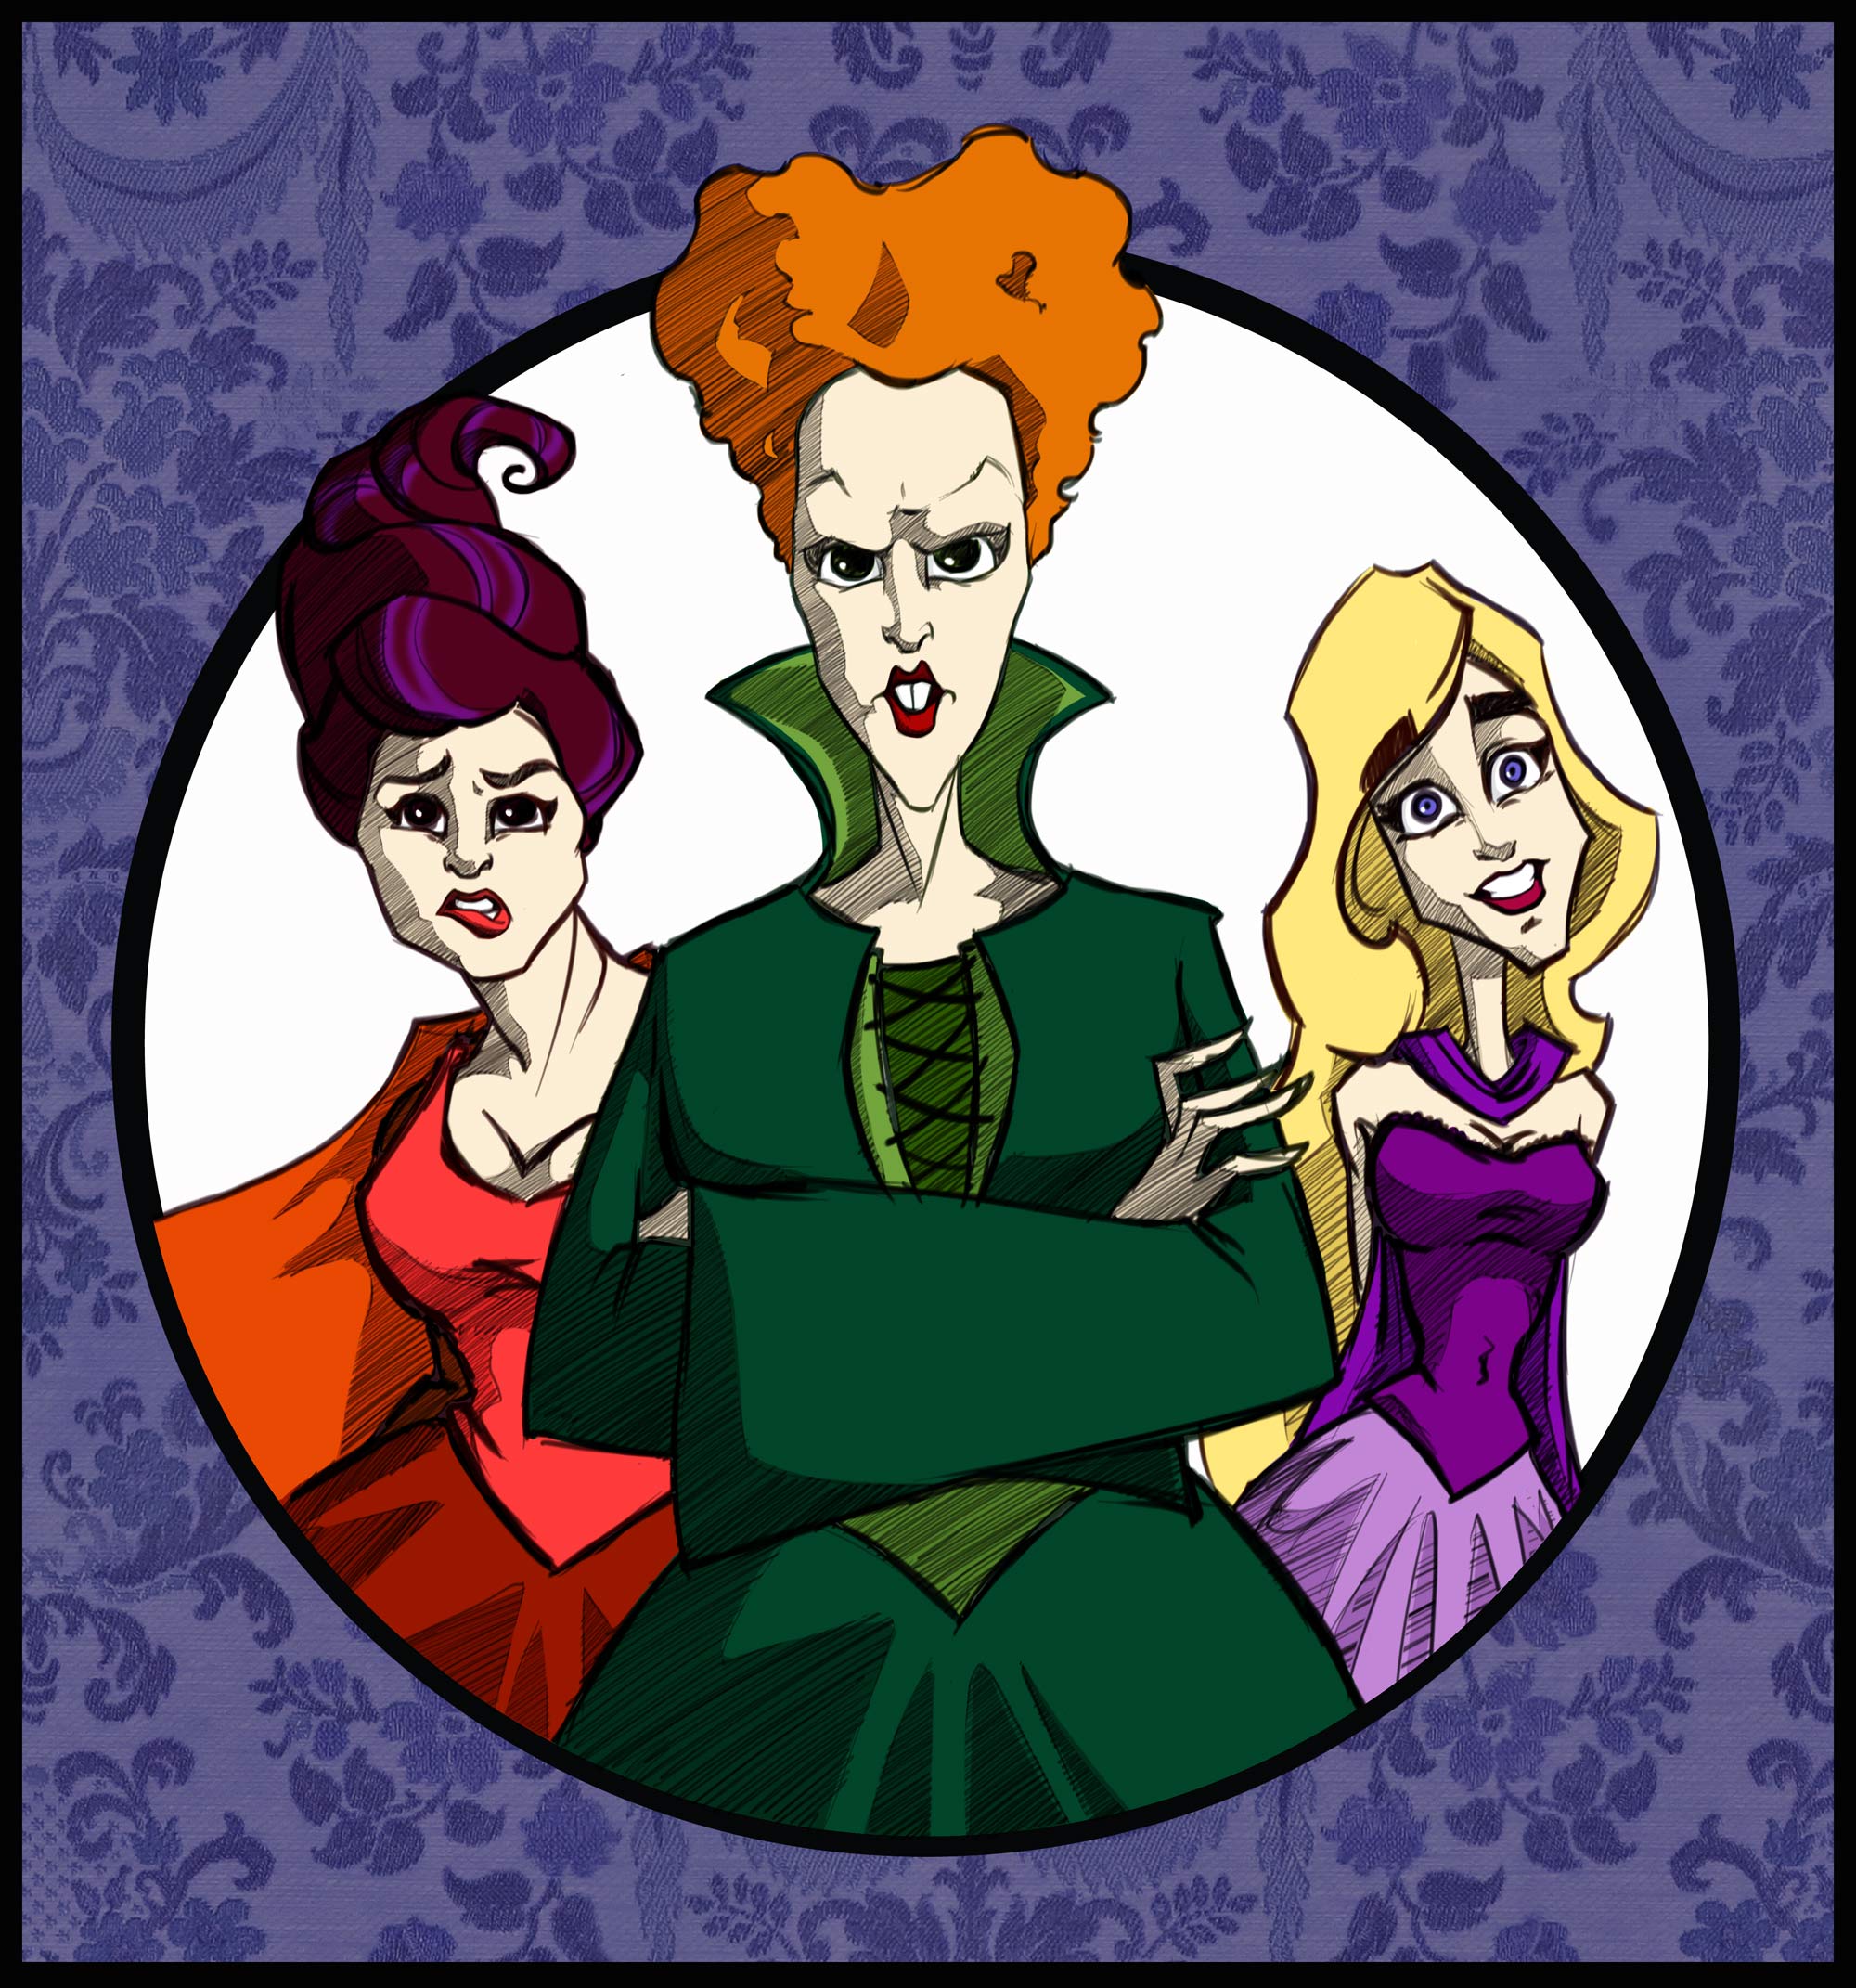 It’s All Just a Bunch of Hocus Pocus.